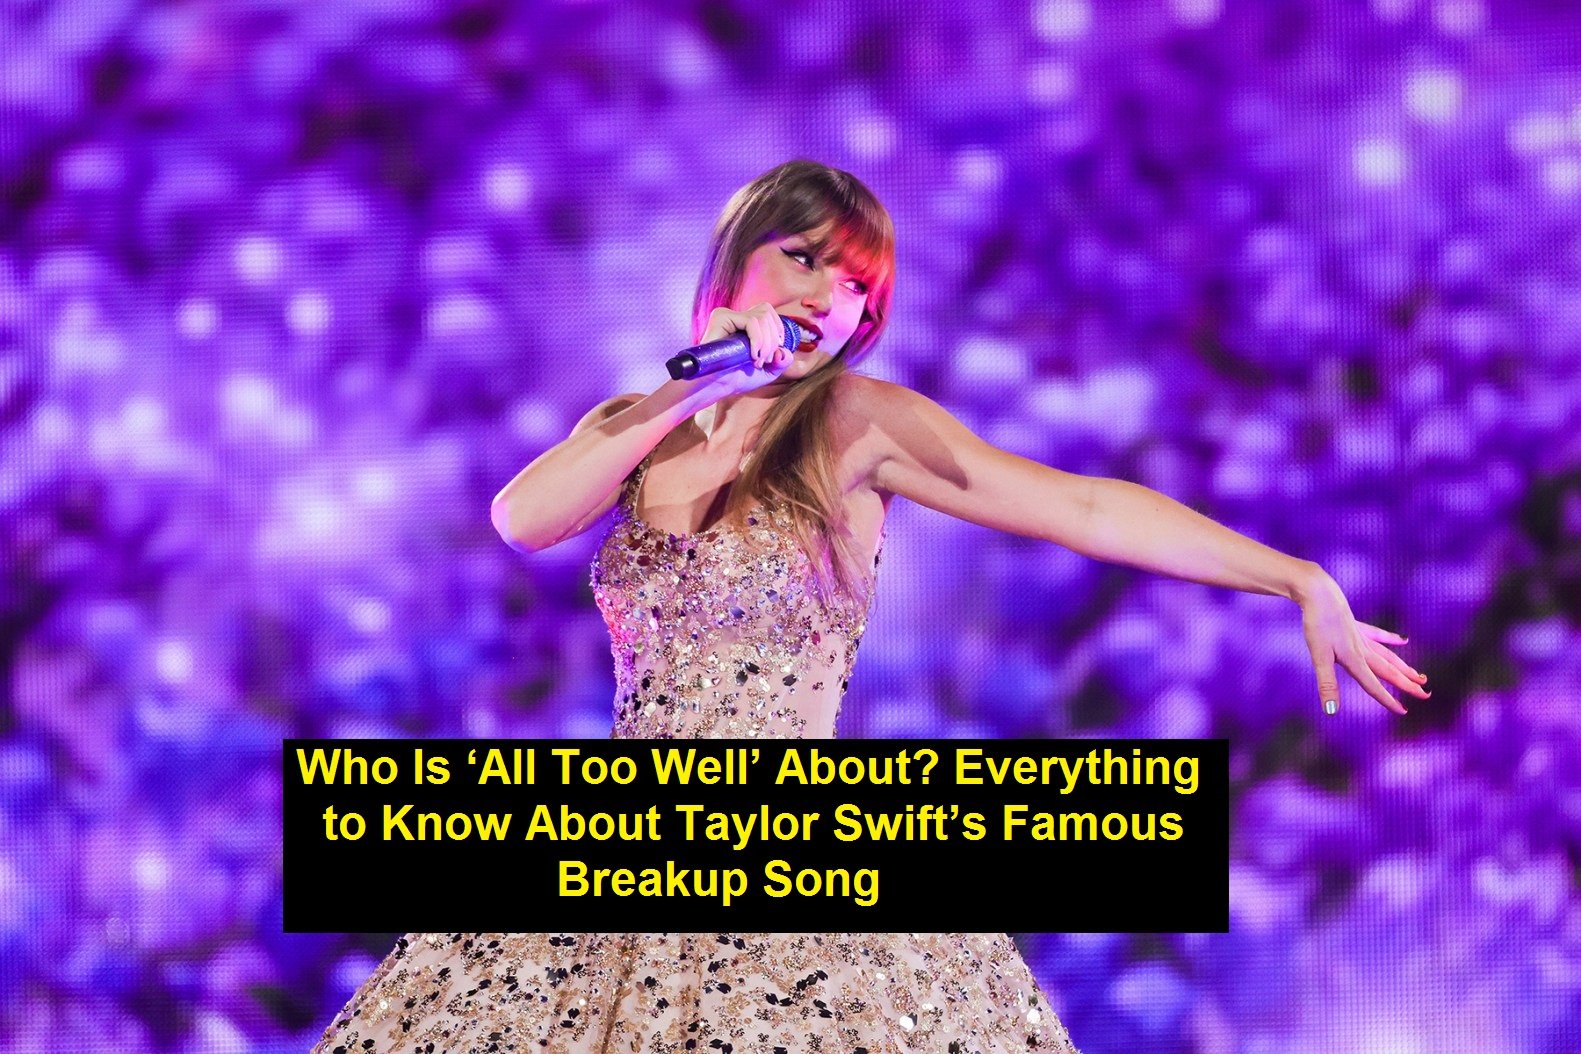 Who Is ‘All Too Well’ About? Everything to Know About Taylor Swift’s Famous Breakup Song